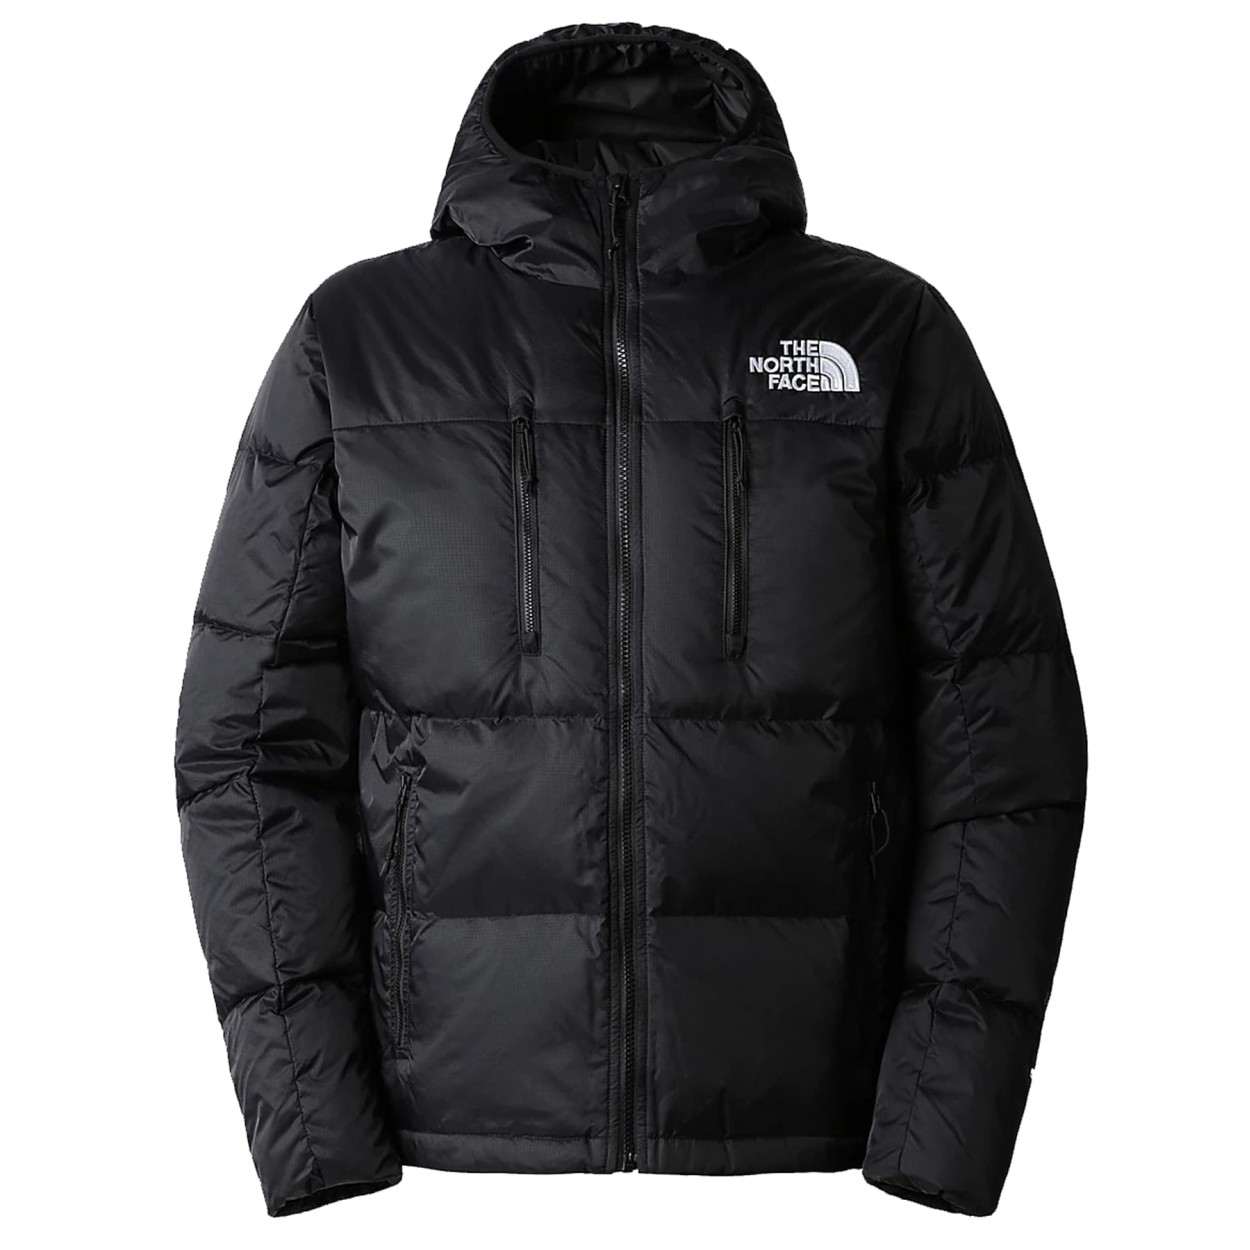 THE NORTH FACE - HIMALAYAN LIGHTWEIGHT DOWN JACKET